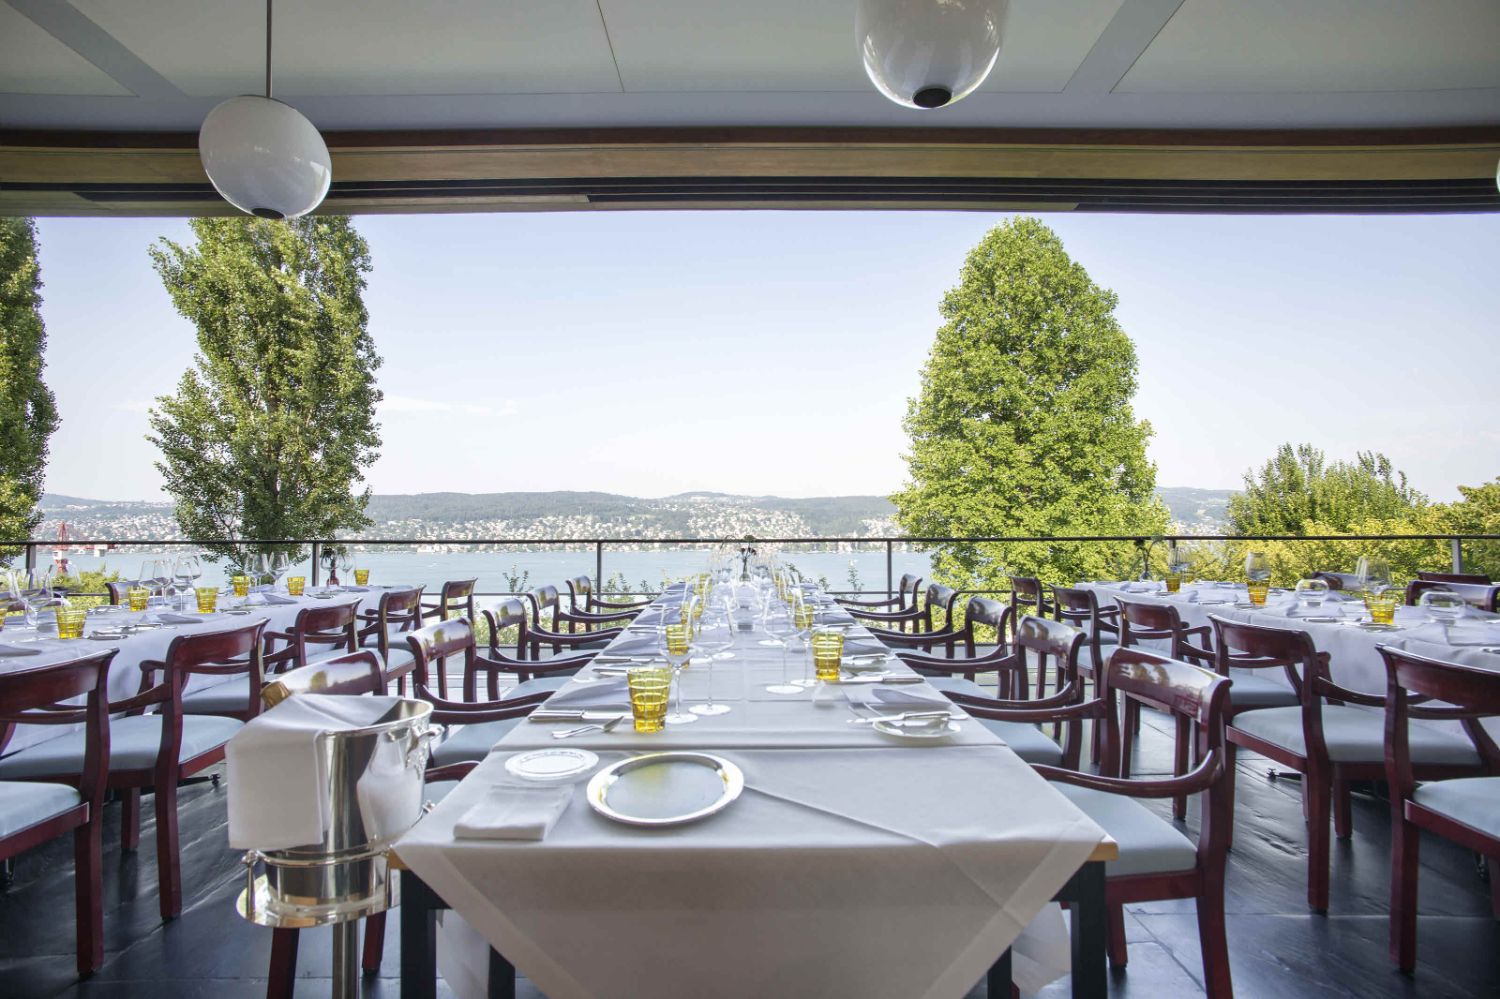 A long white table with tableware overlooking the lake of Zurich.